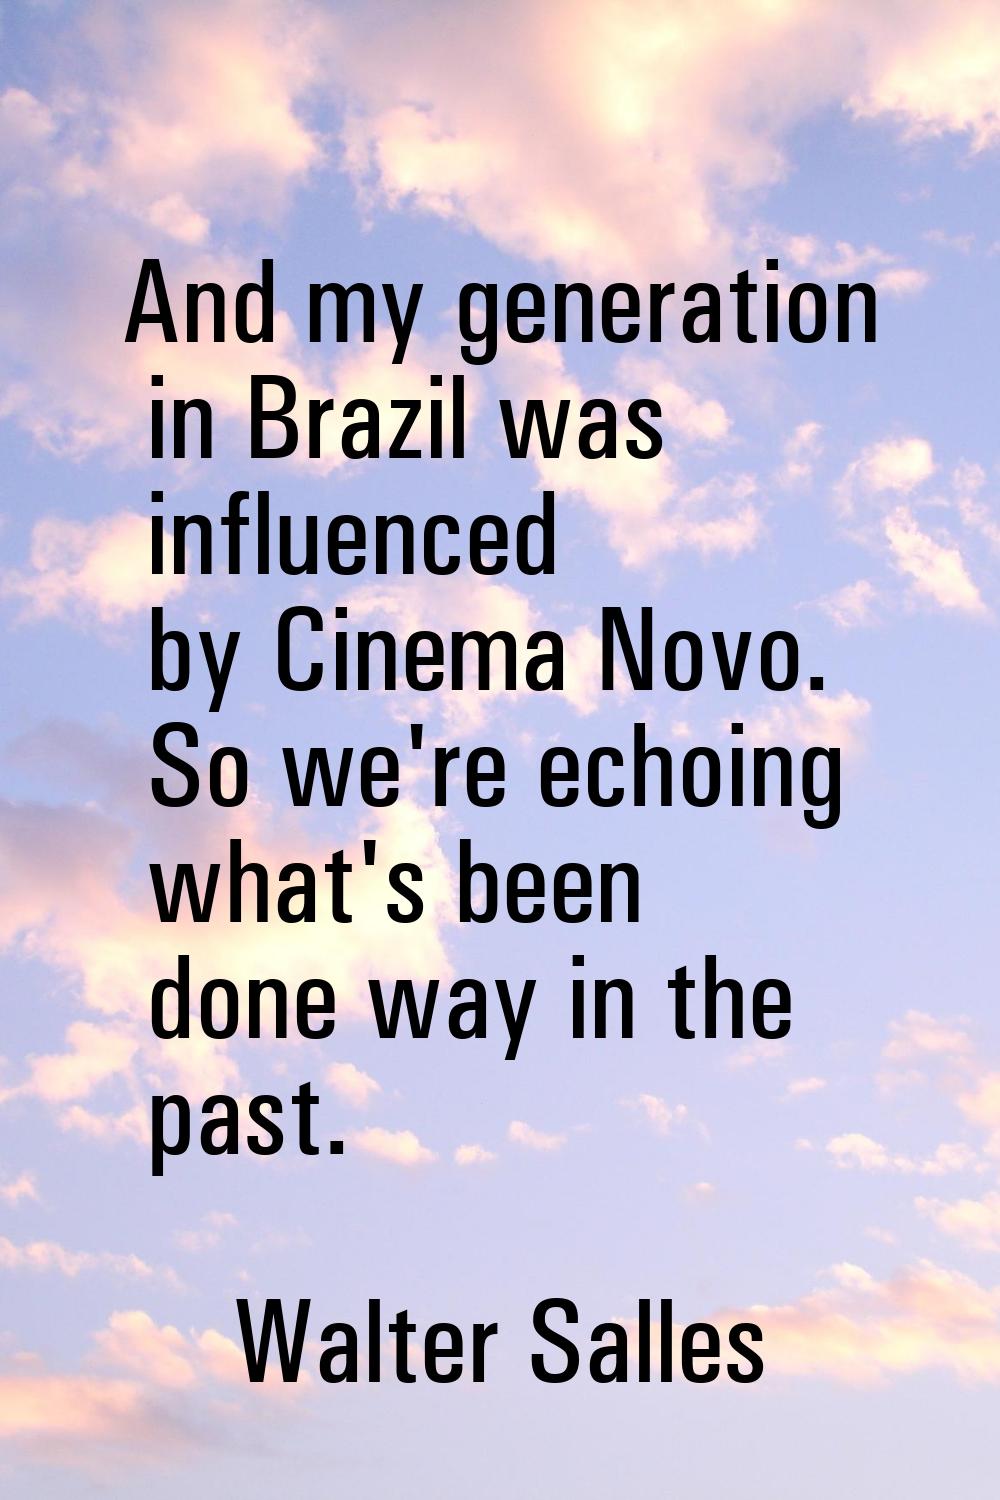 And my generation in Brazil was influenced by Cinema Novo. So we're echoing what's been done way in